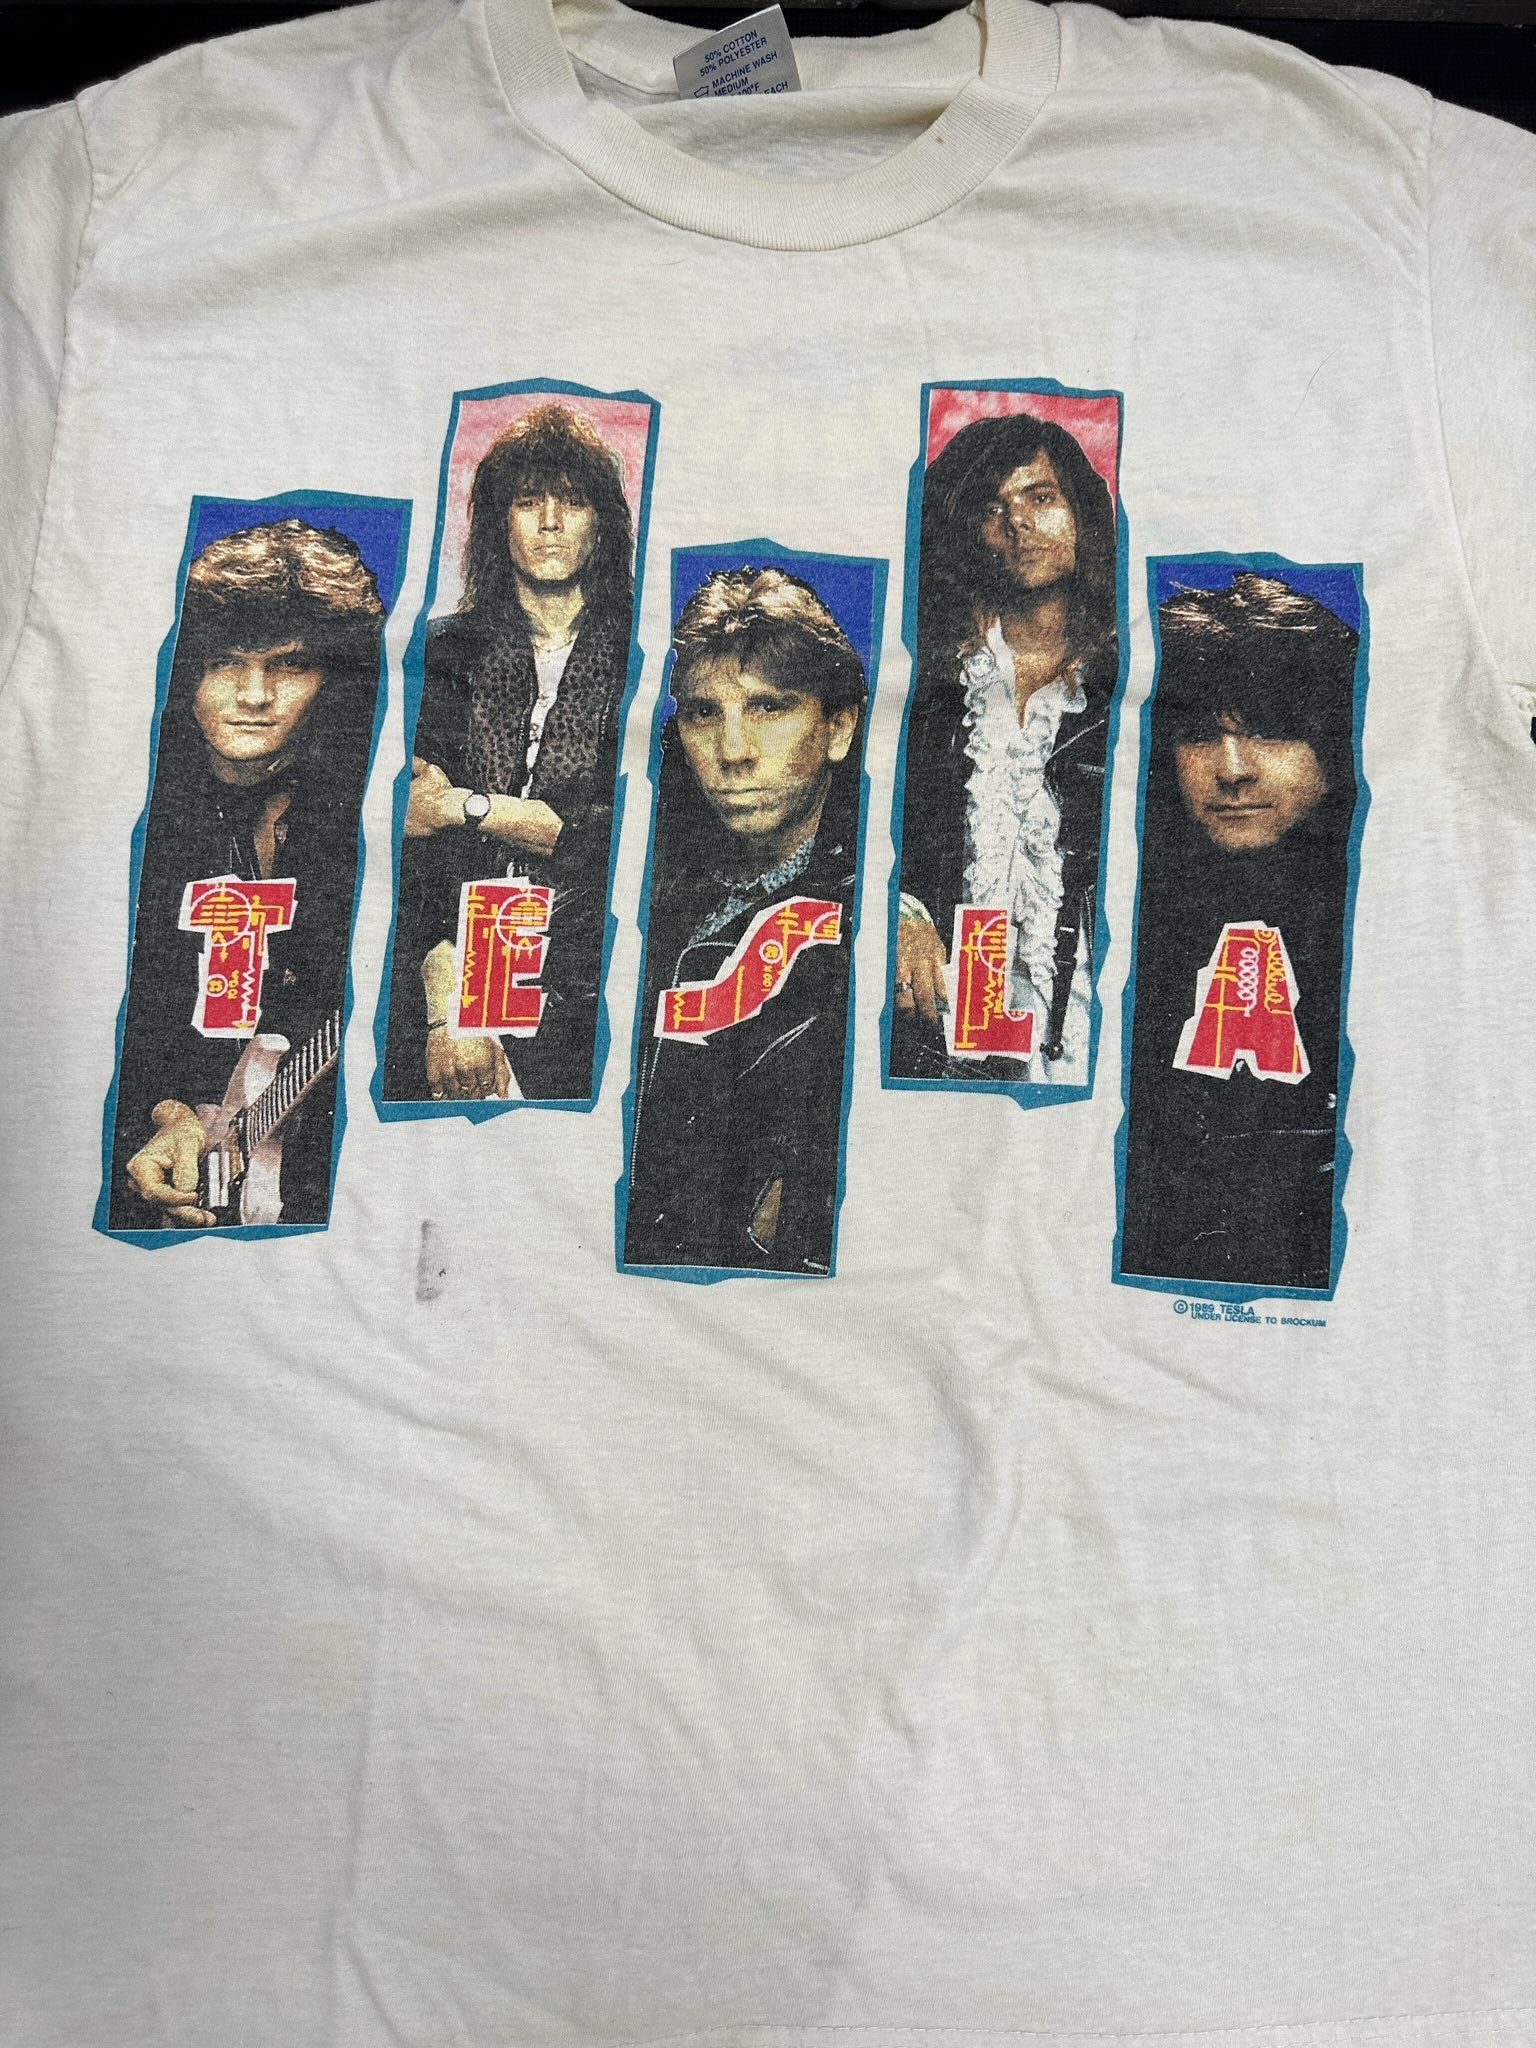 Tesla 1989 Band T-Shirt, White, Tagged L (25.5" Long, 19" Pit To Pit)(Blemish On Front; See Pics)